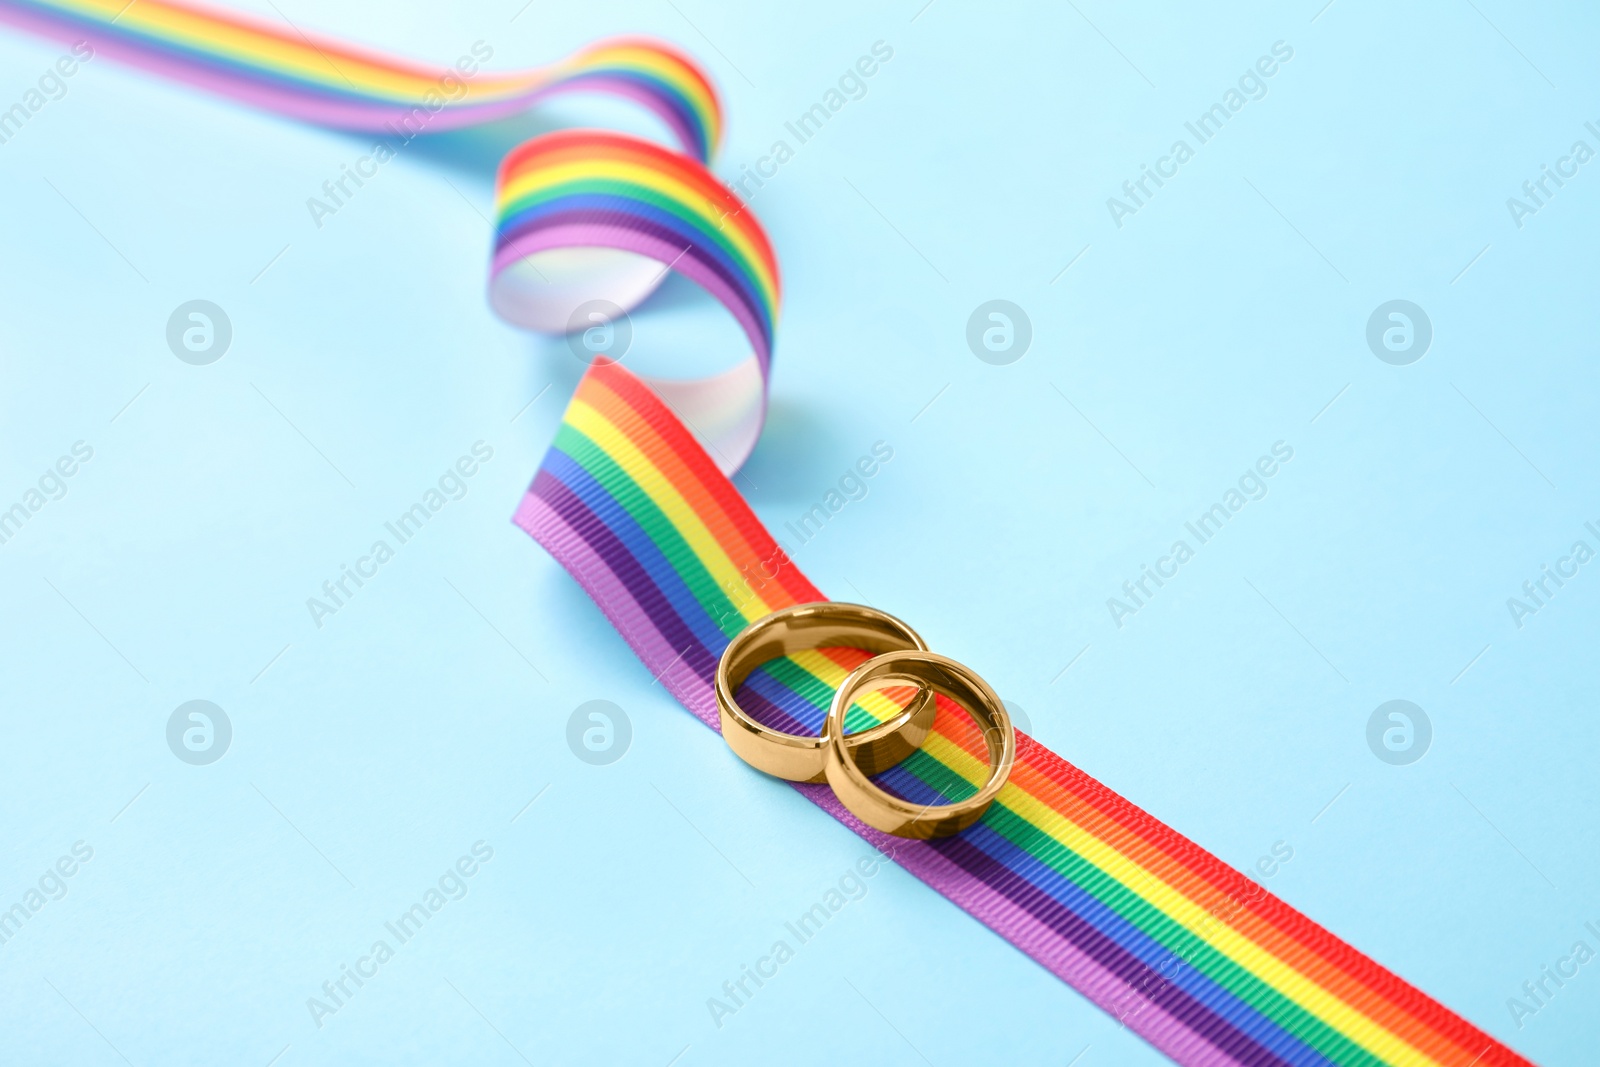 Photo of Wedding rings and rainbow ribbon on color background. Gay symbol